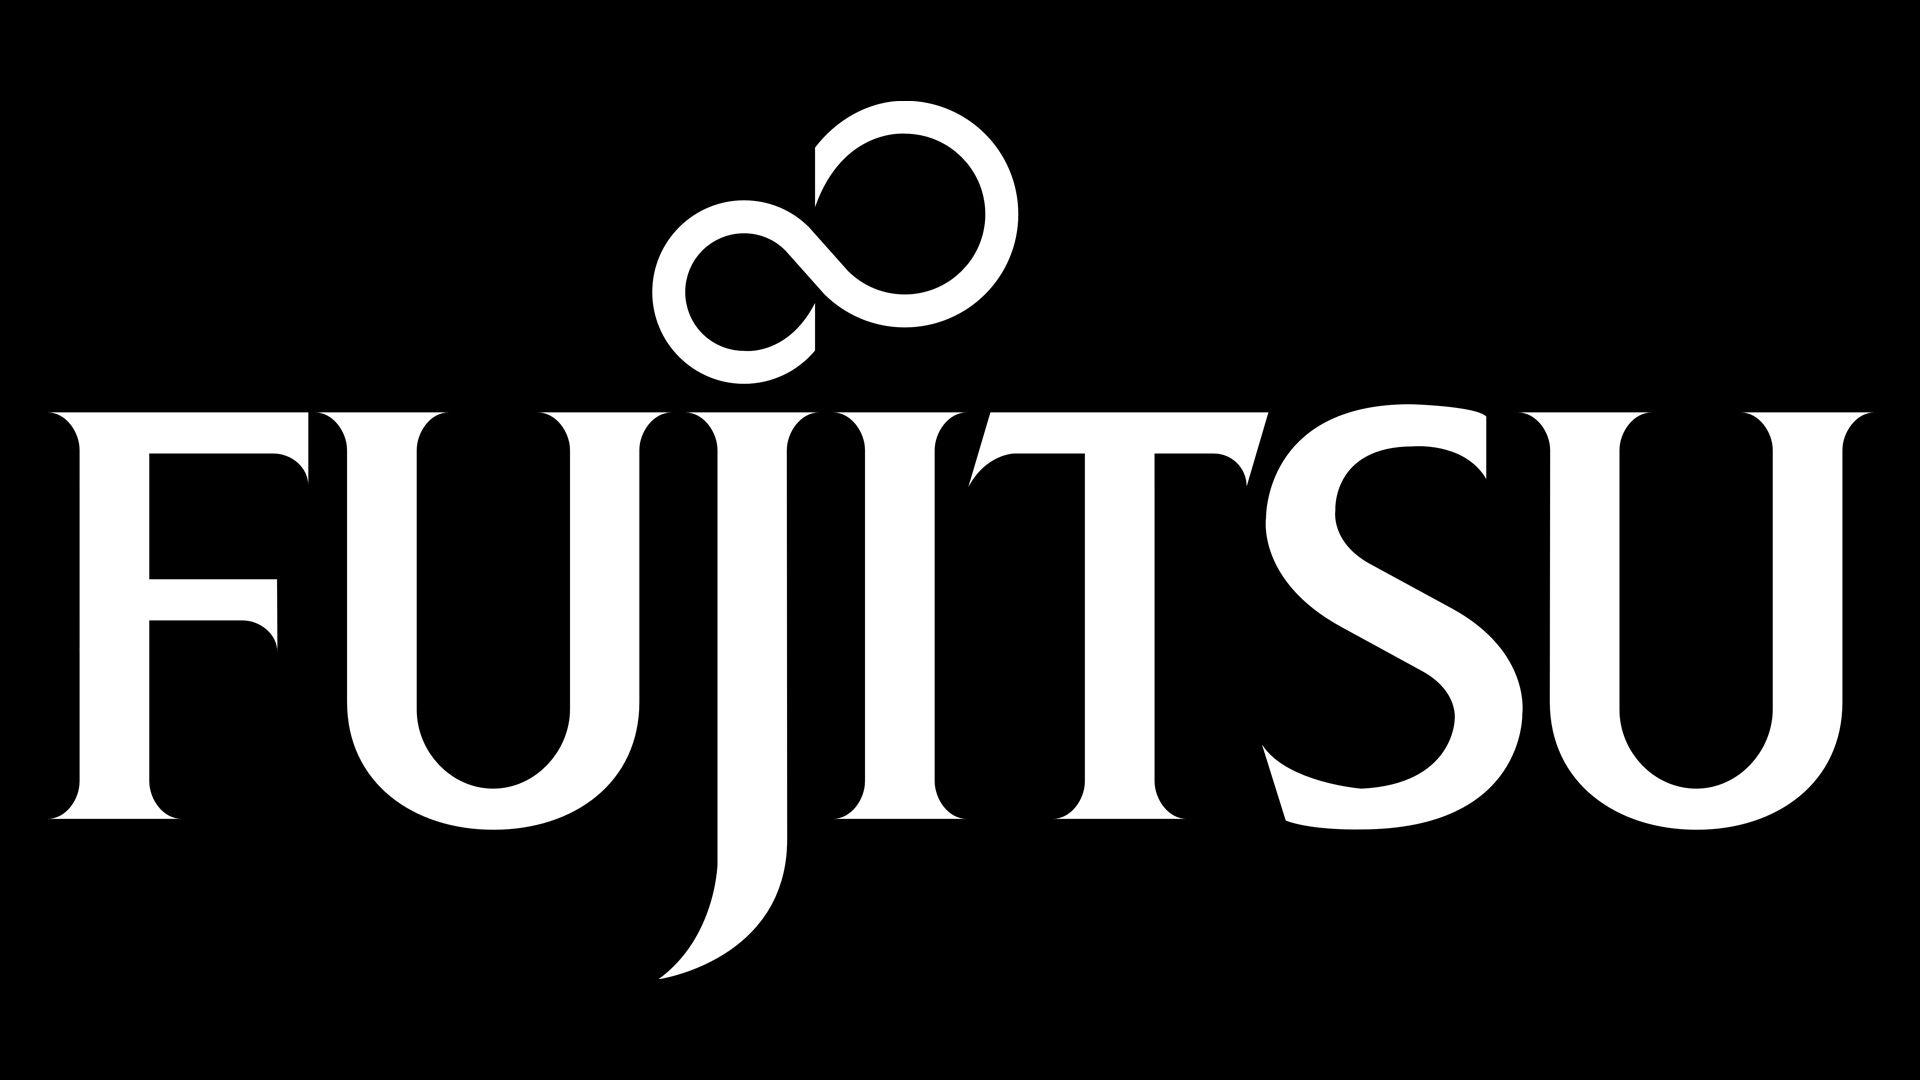 Fujitsu Logo - Fujitsu Logo, Fujitsu Symbol, Meaning, History and Evolution